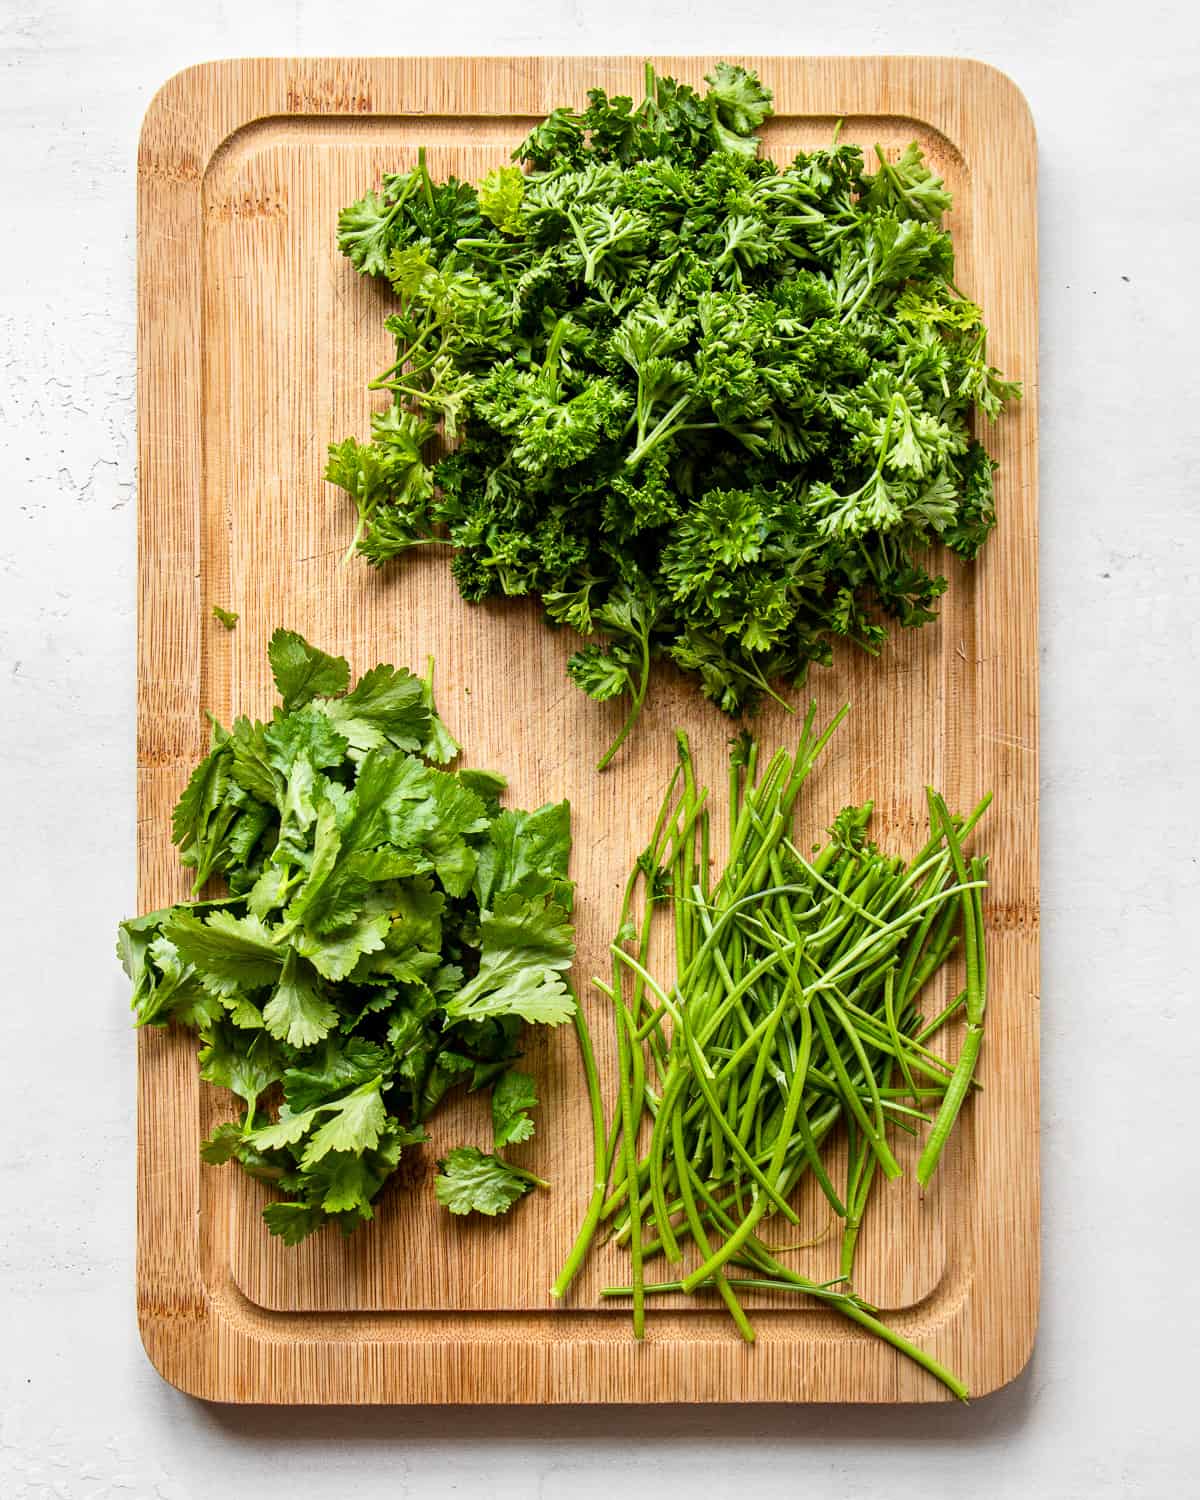 Parsley and cilantro with stems removed on a wooden cutting board.